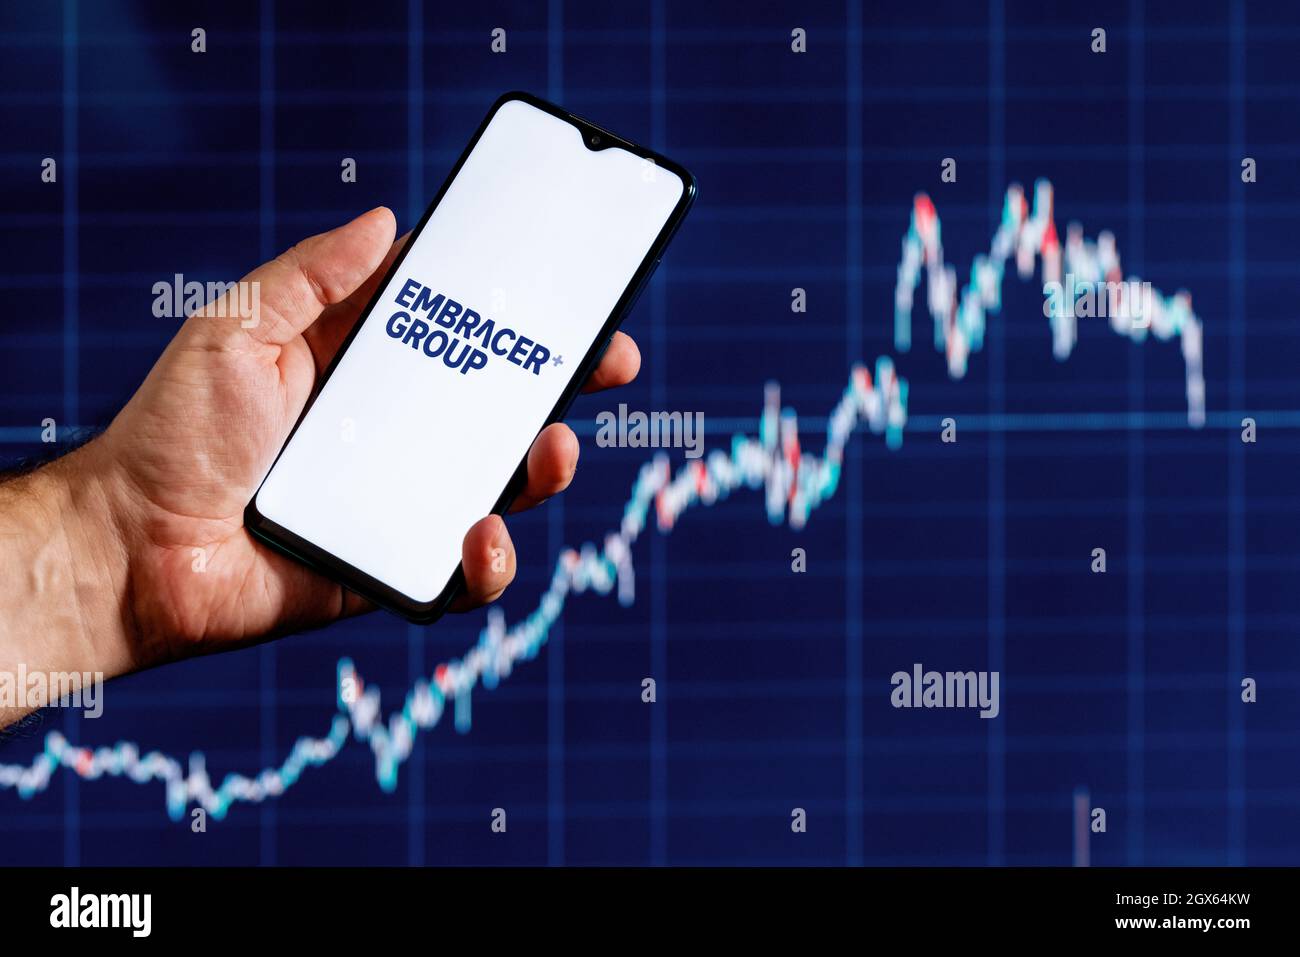 A smartphone with the Embracer Group logo in a hand. Stock chart on the background. Stock Photo